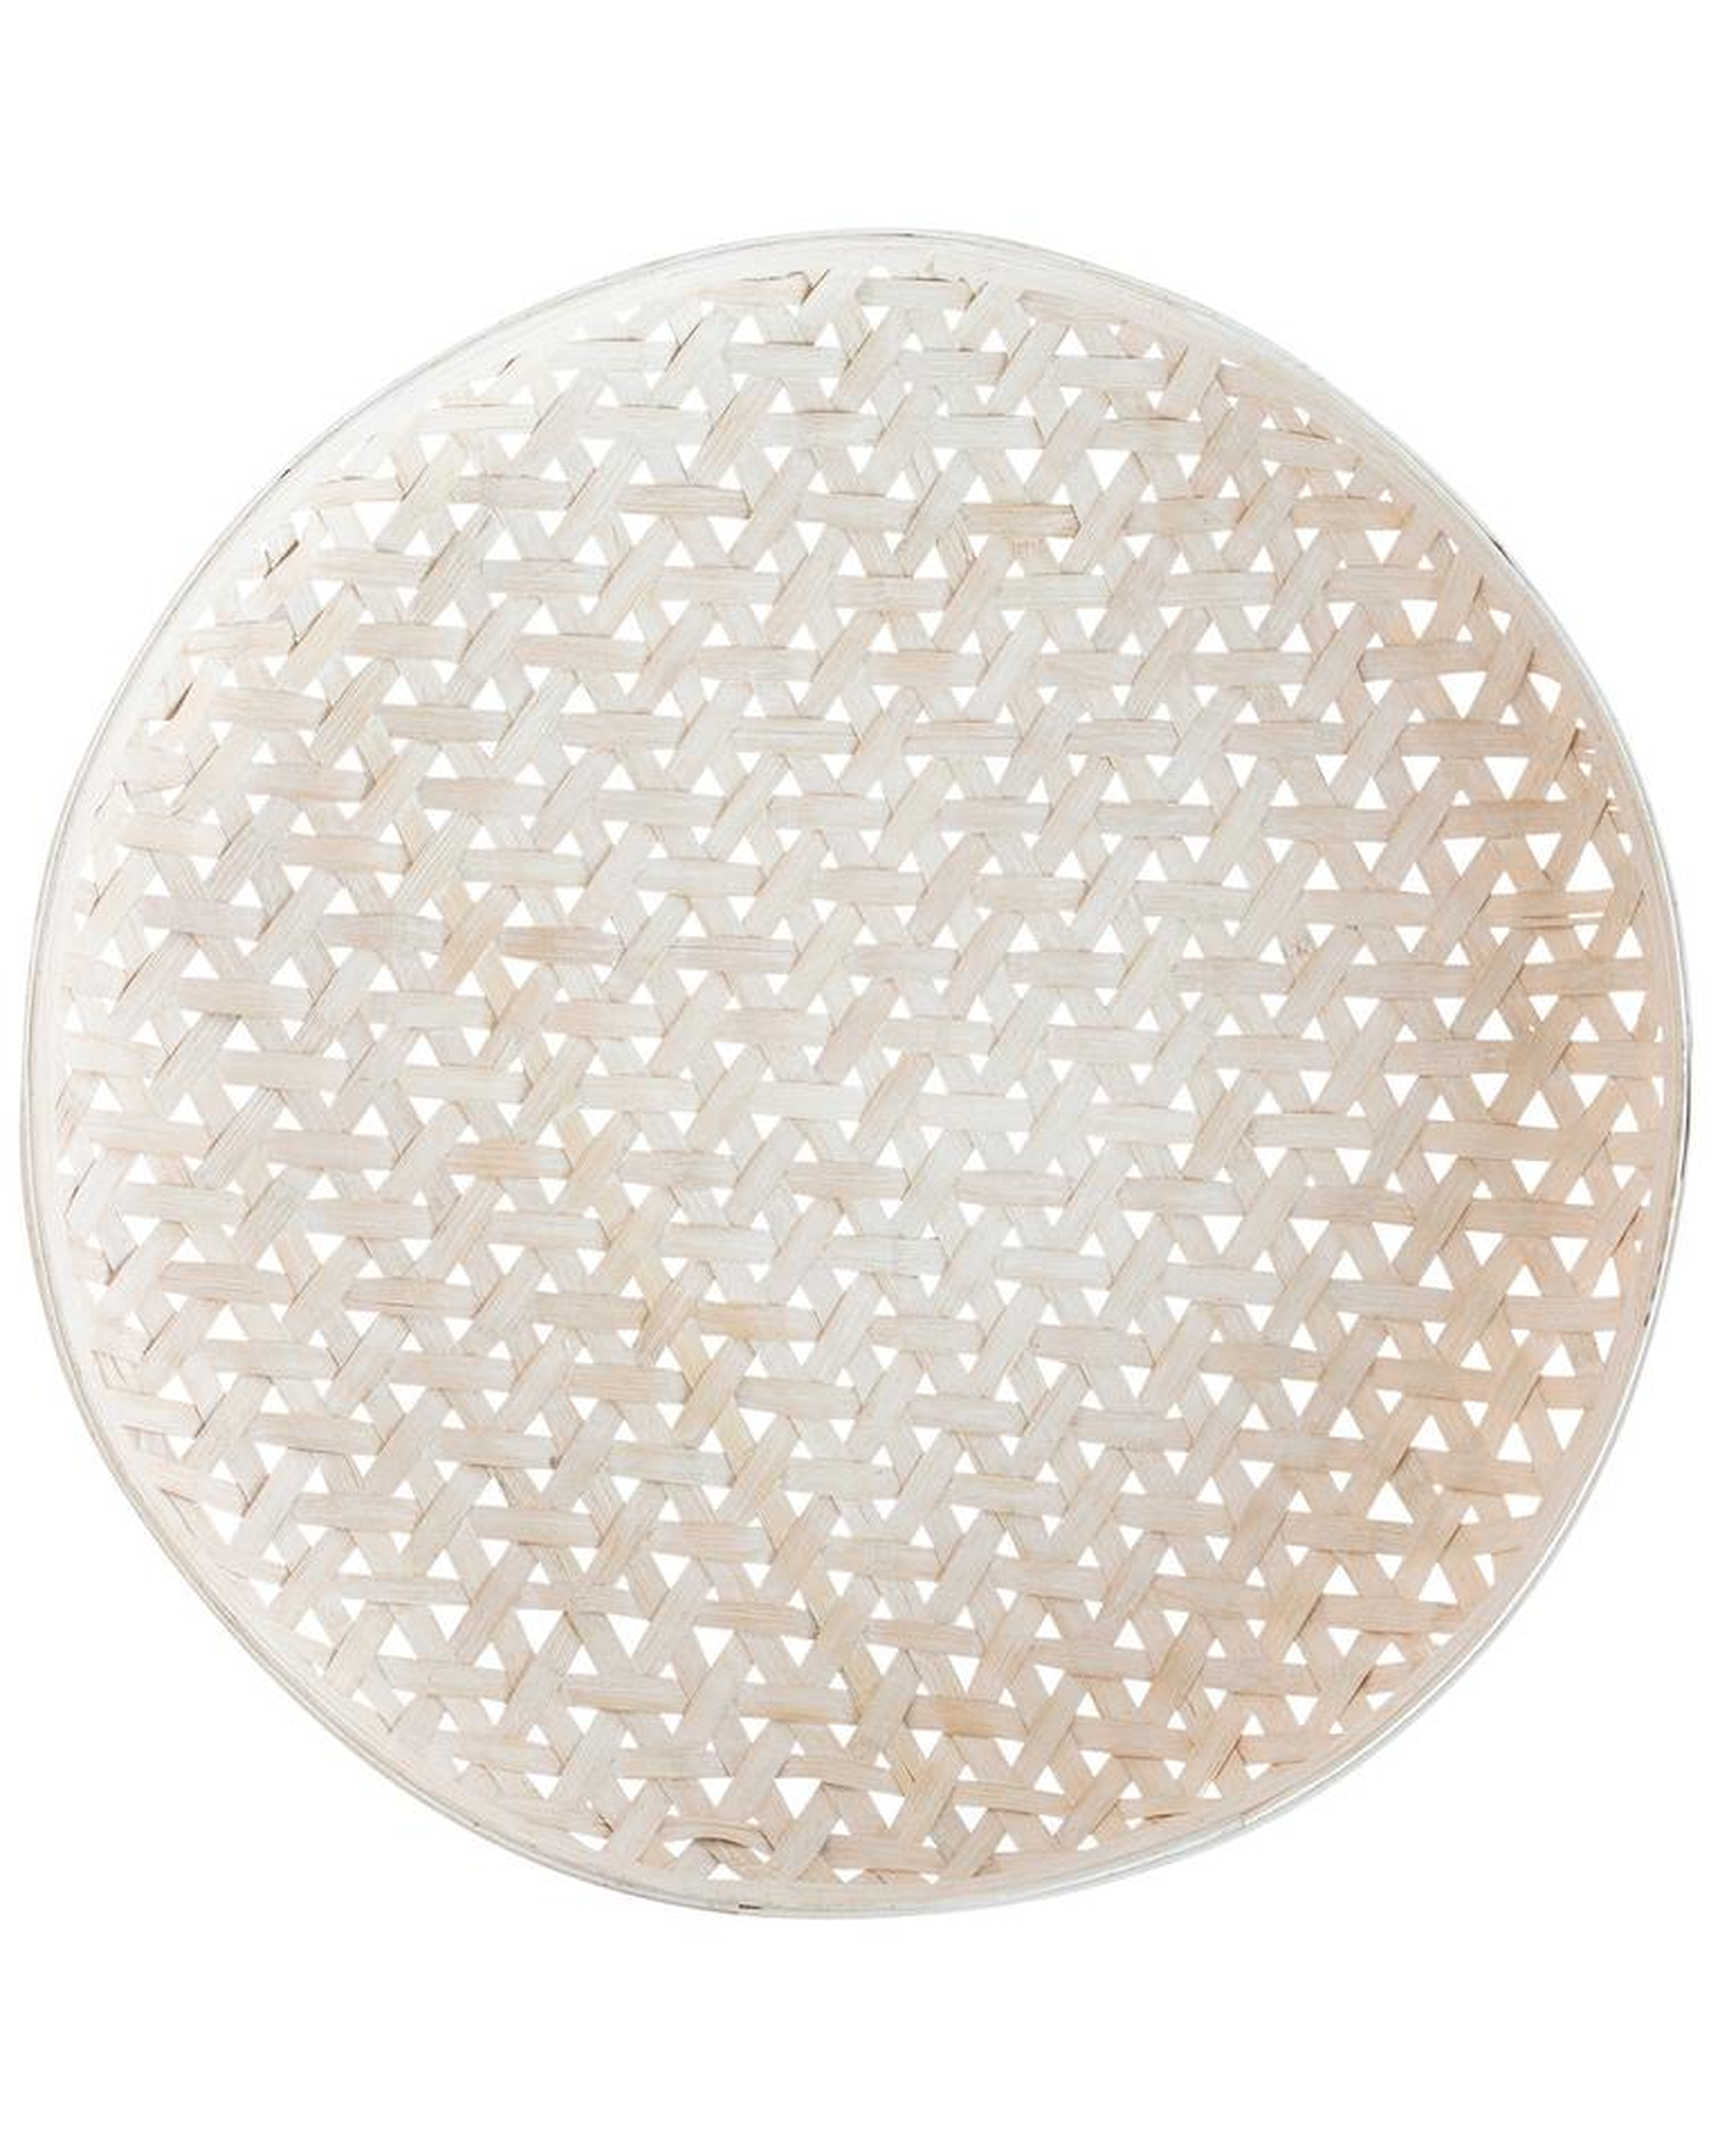 MAREA WOVEN TRAY - LARGE - McGee & Co.